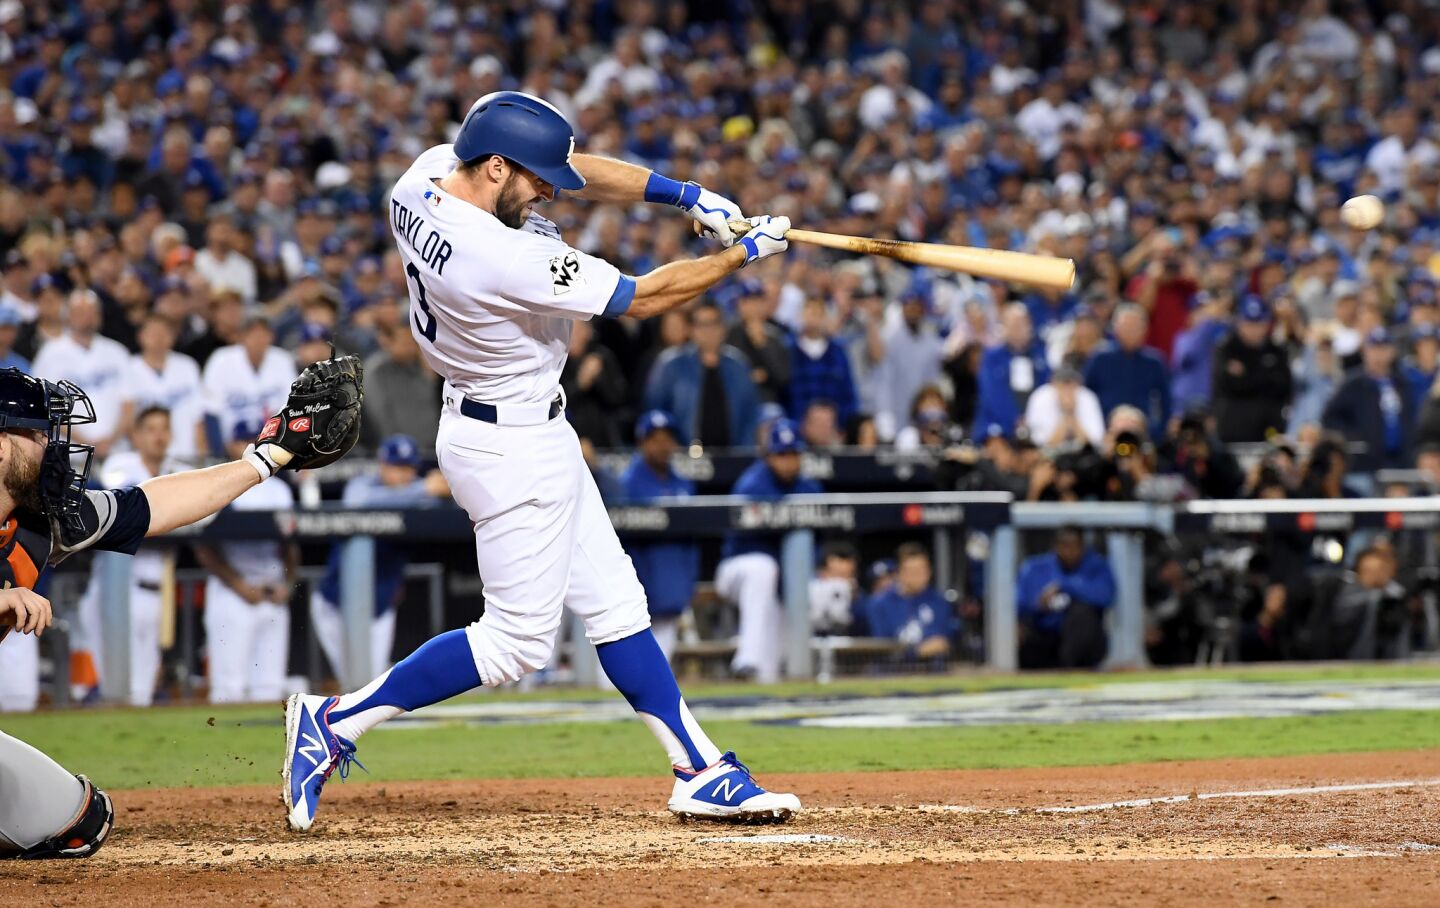 Chris Taylor hits an RBI double against the Astros in the sixth inning.